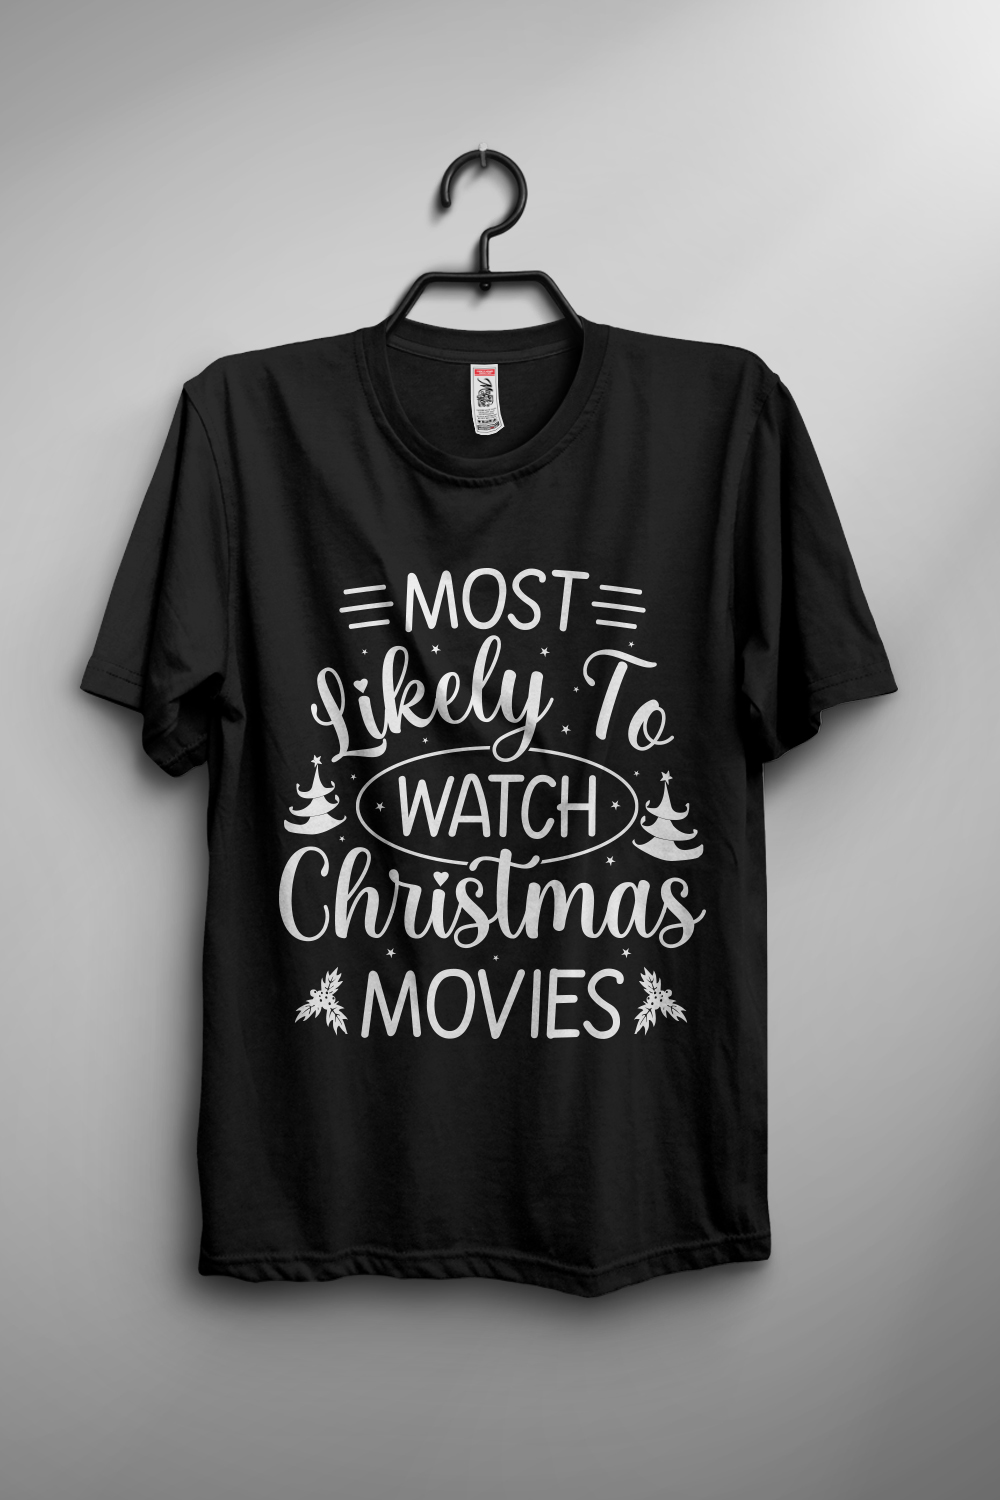 Most likely to watch christmas movies T-shirt design pinterest preview image.